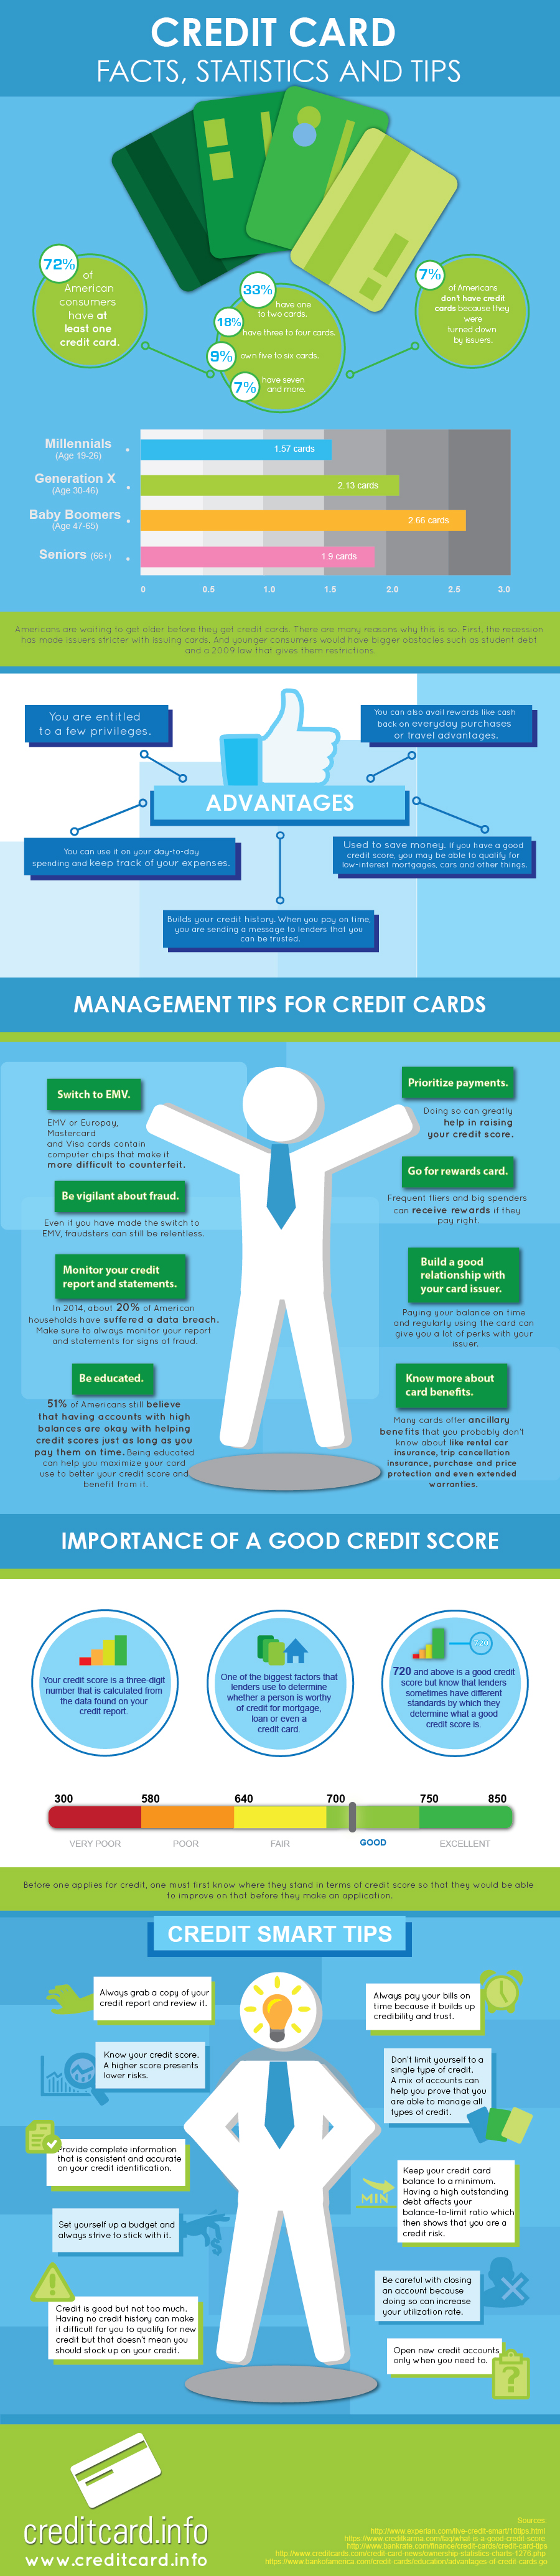 Credit Card Infograpics - Credit Card Facts, Stats and Tips